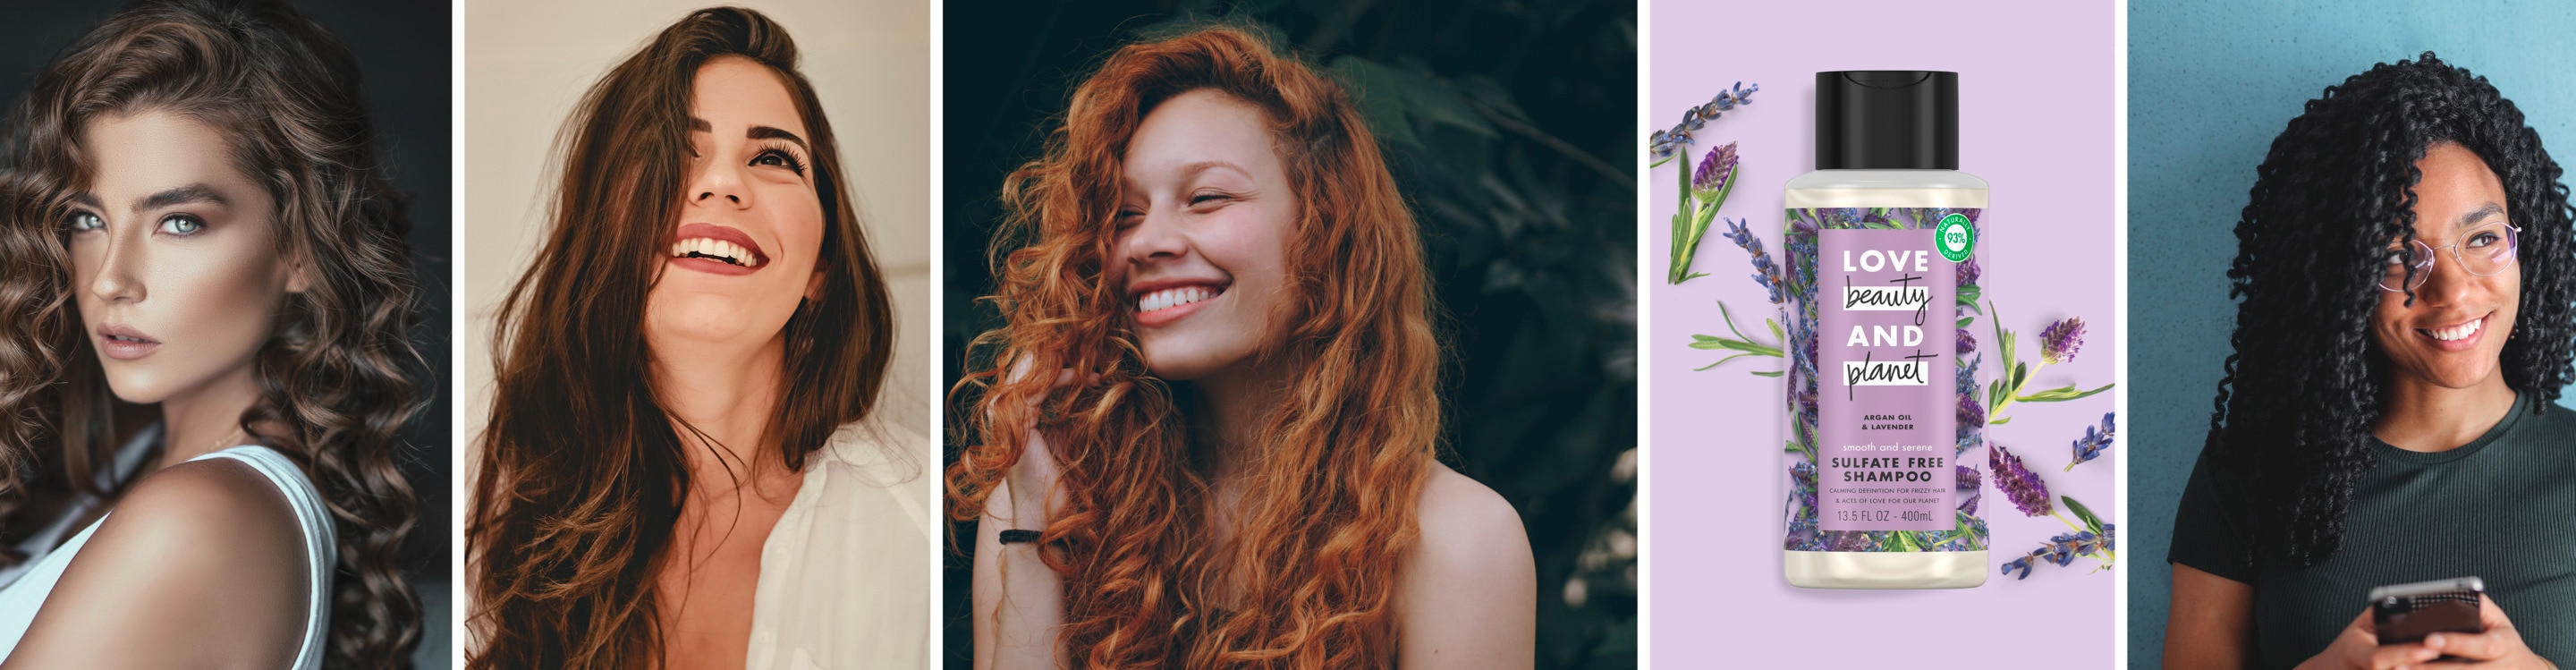 Healthy Hair: Header Image of a with Long Curly, Healthy Hair and Love Beauty and Planet Shampoo